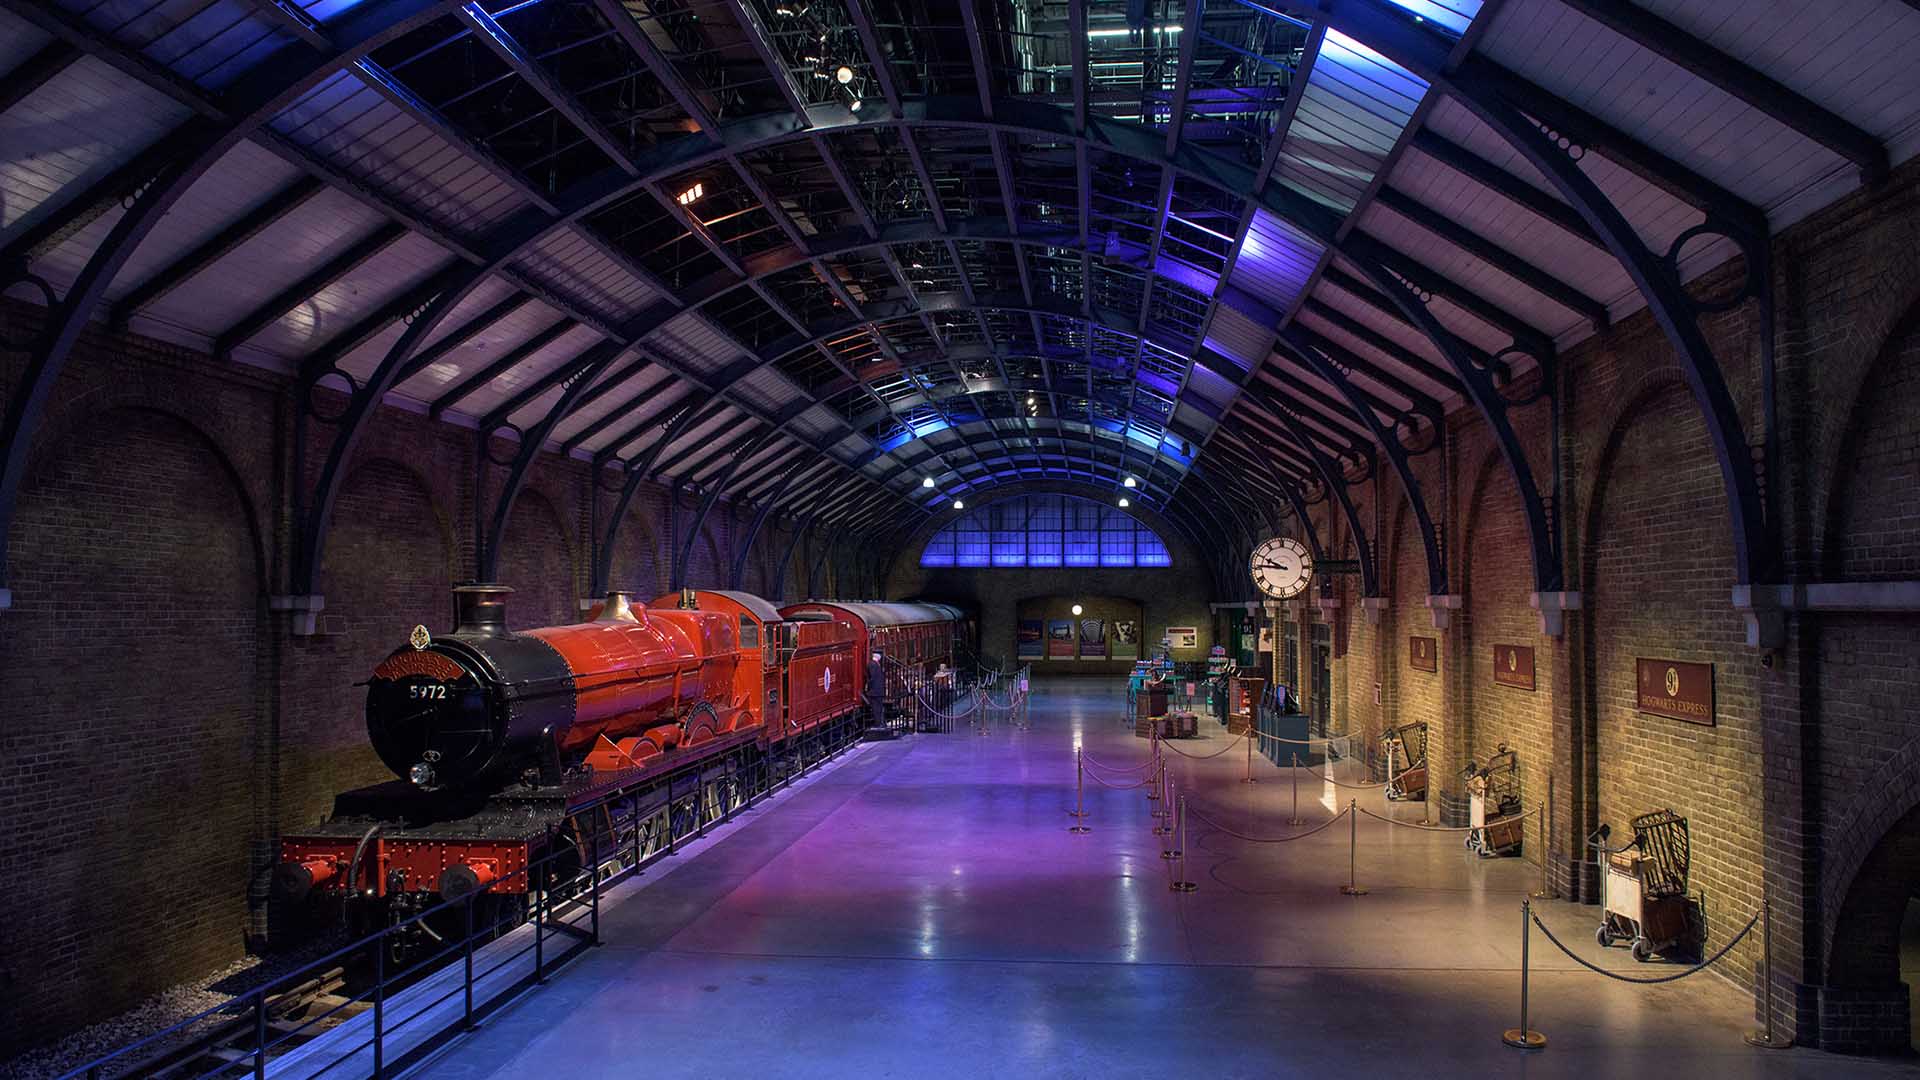 Japan Might Soon Be Home to a Dedicated 'Harry Potter' Theme Park